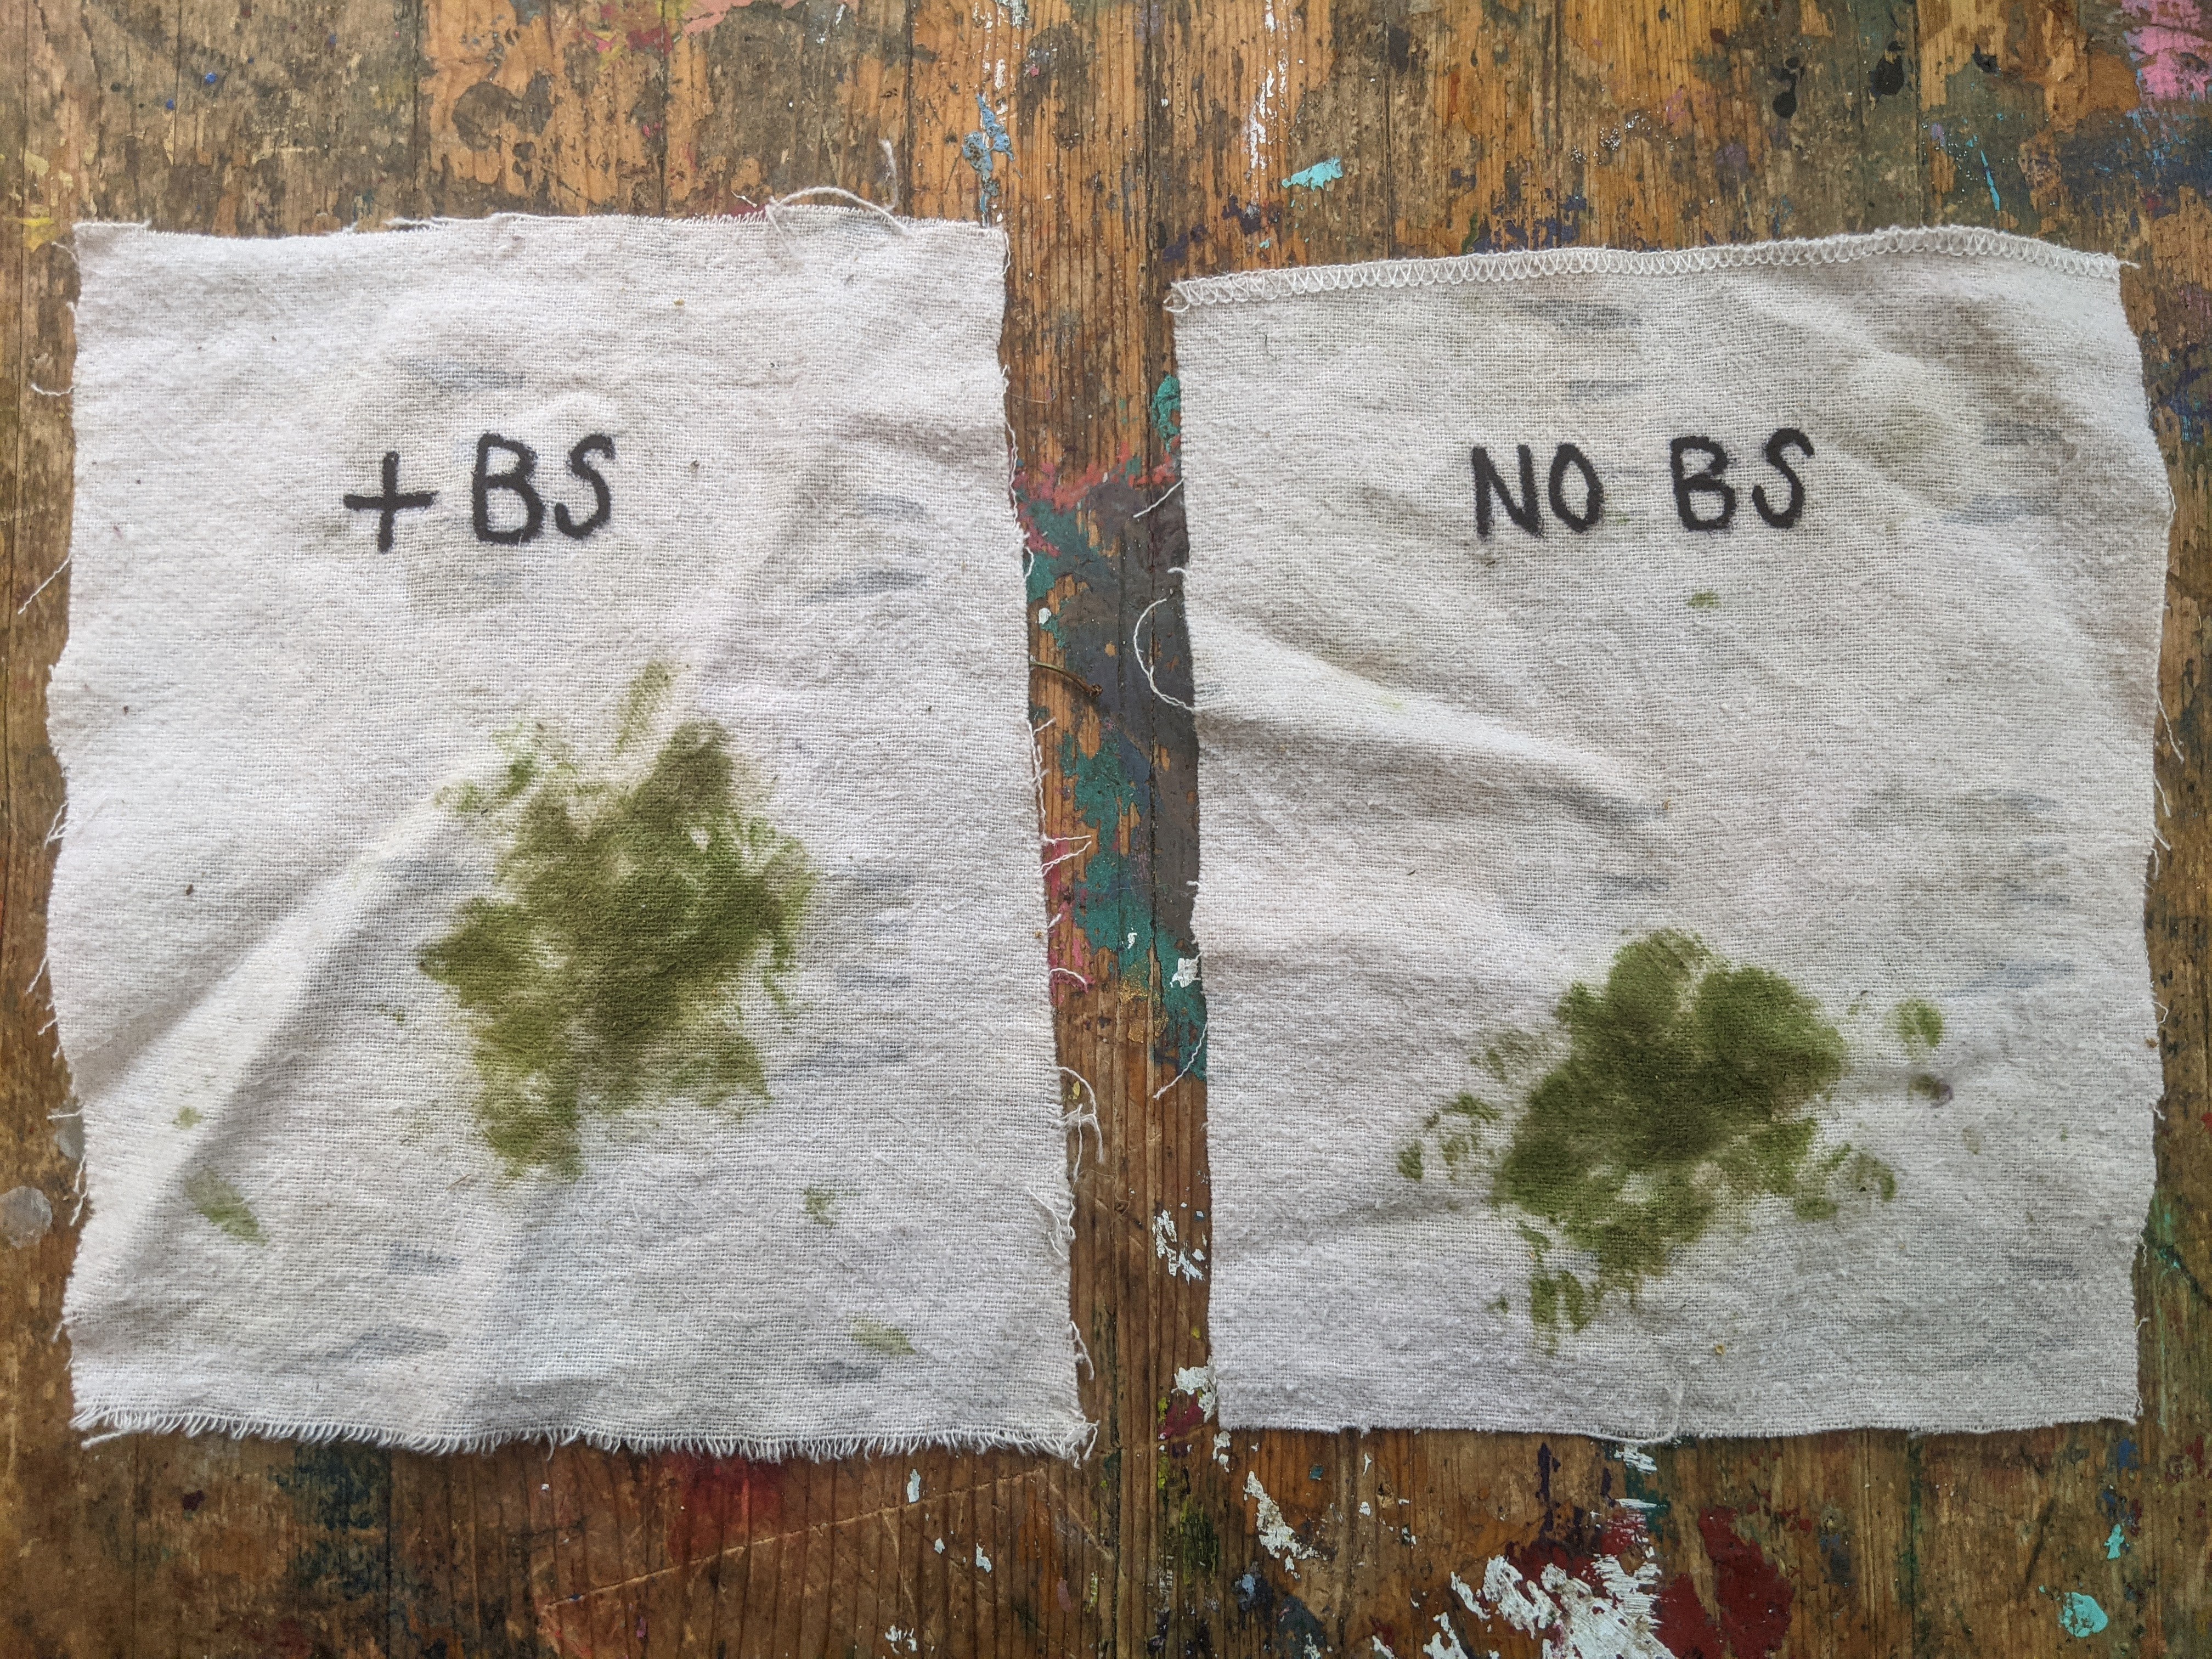 Image of 2 pieces of cloth with grass stains